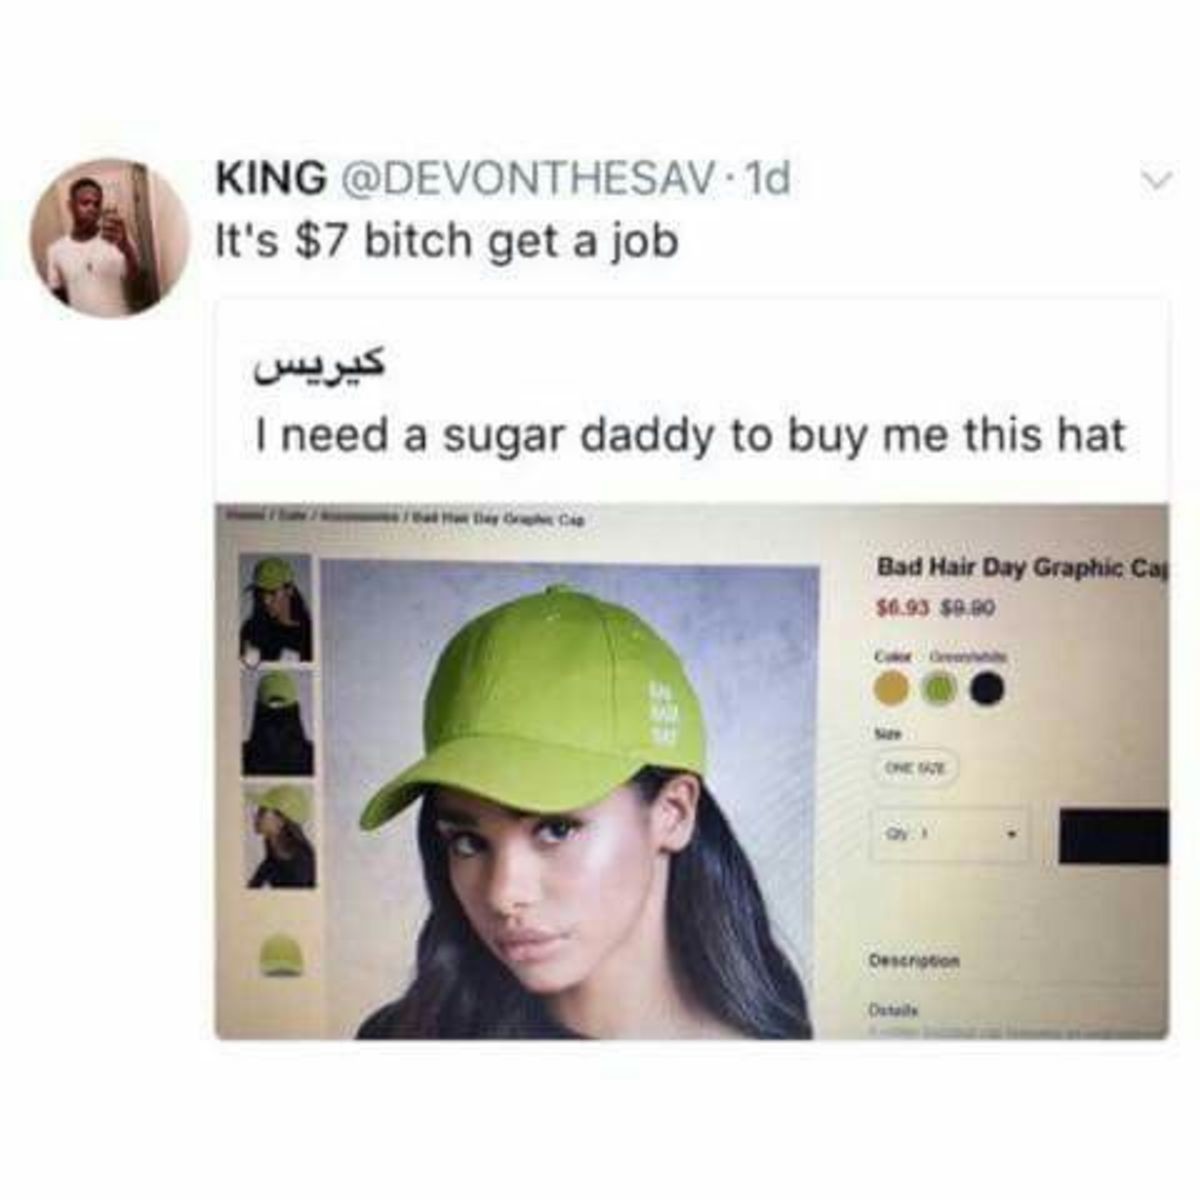 These es are cheap af. . It' s bitch get a job I need a sugar daddy to buy me this hat. That hat is hideous btw